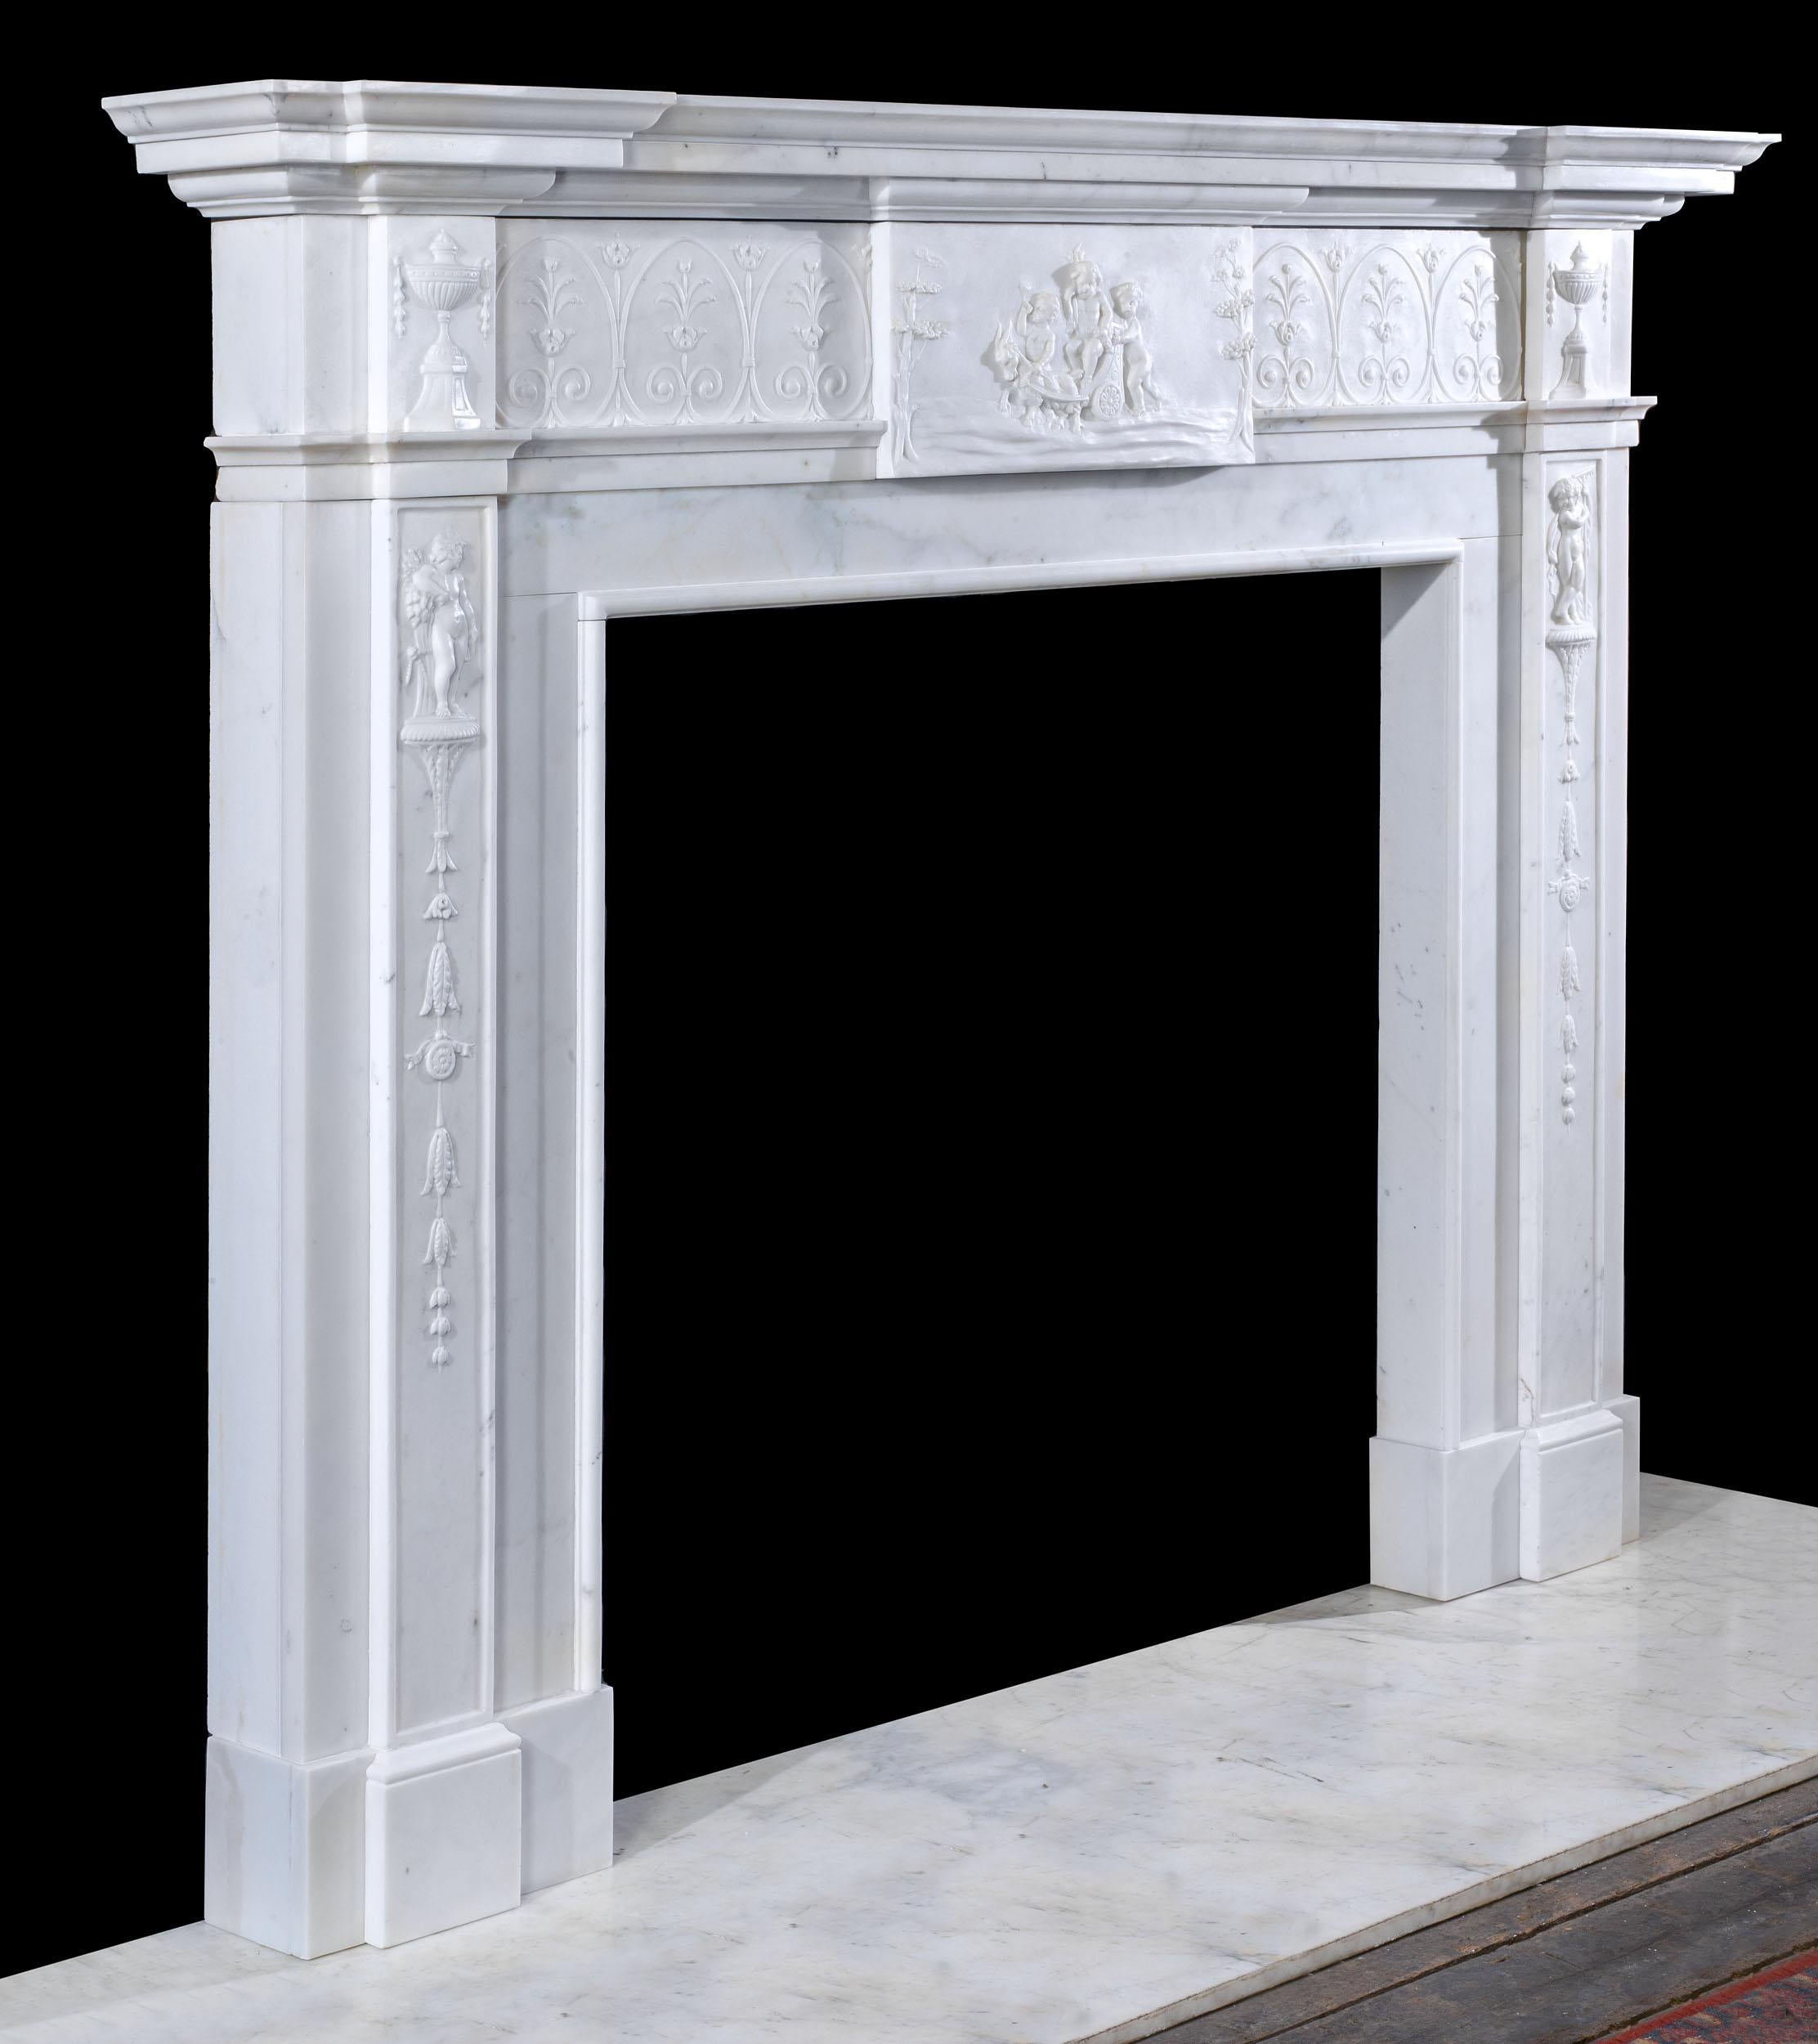 A fine eighteenth century George III chimneypiece in statuary marble. The solid reverse breakfront shelf sits above a frieze which is delicately carved with a stylised foliate design. This is centred by a tablet depicting a putto imitating Bacchus